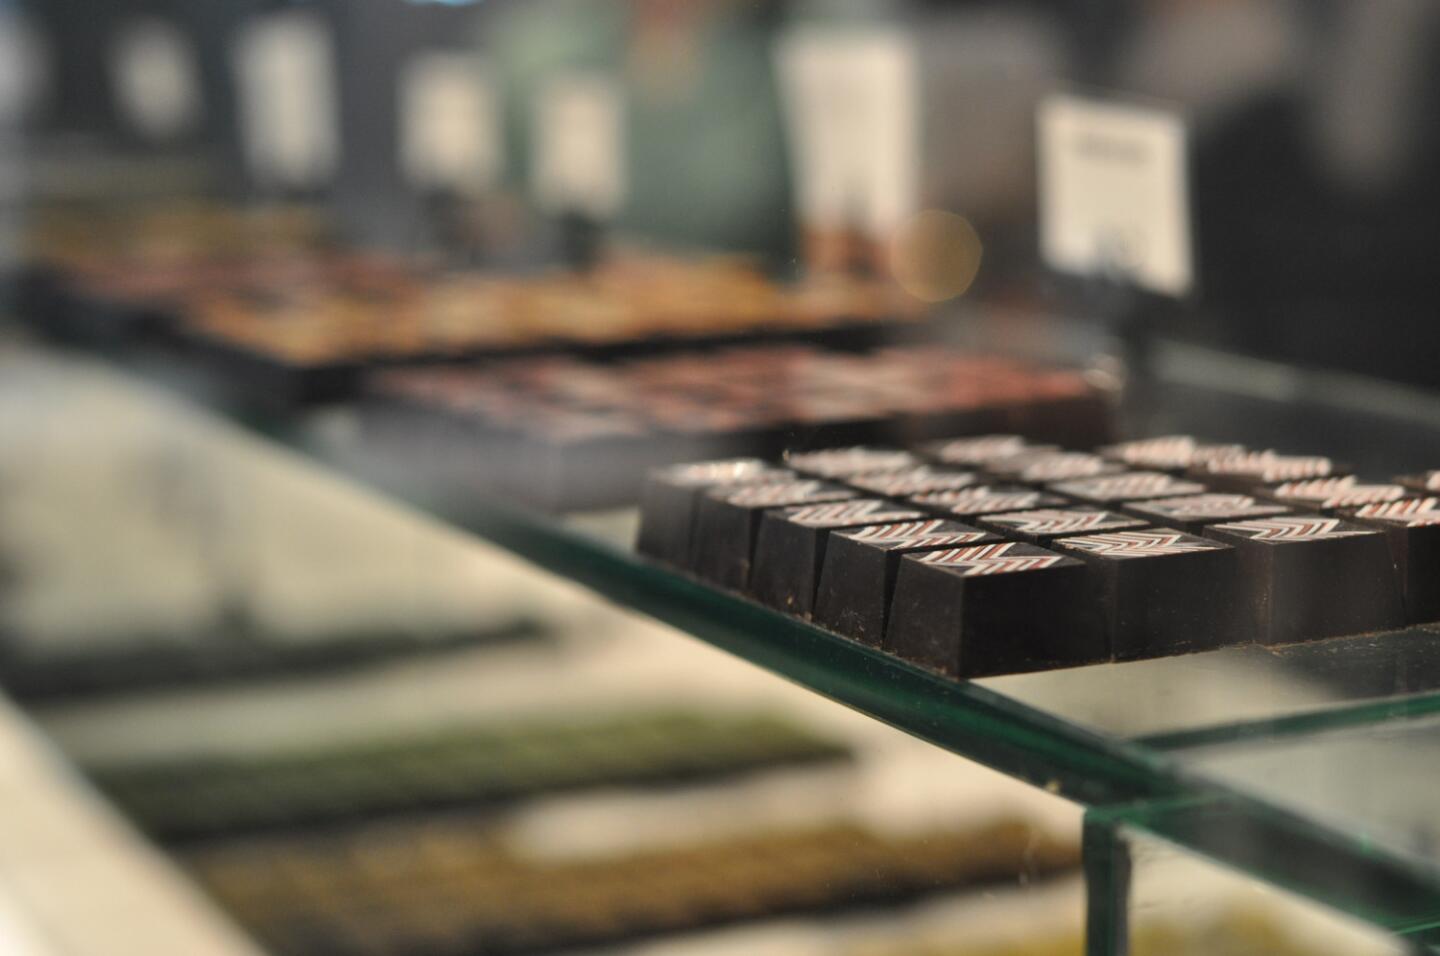 Inside the glass cases at Compartes are rows of custom-made chocolates.